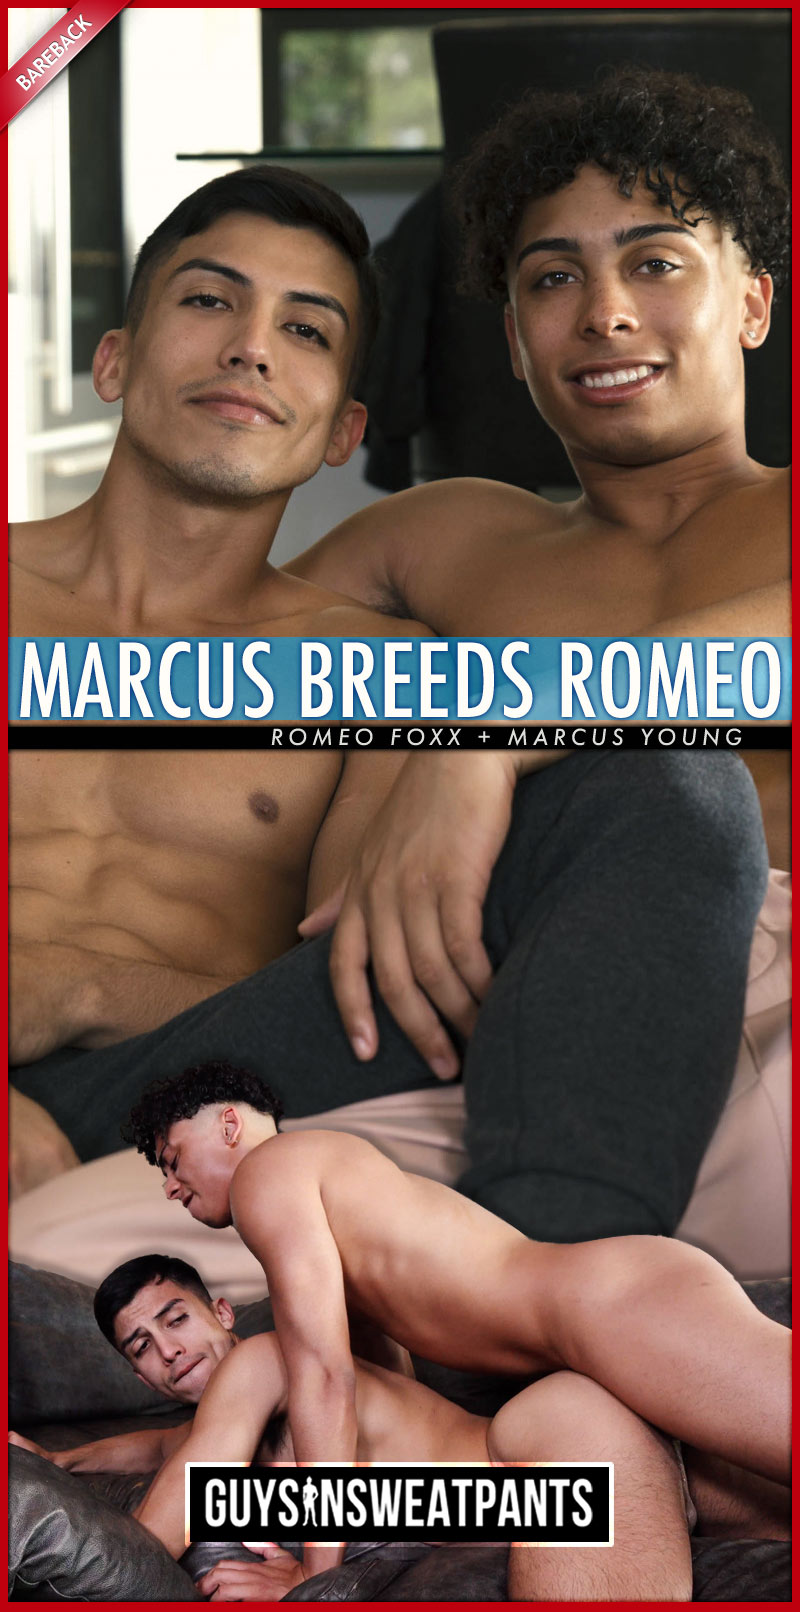 Guys In Sweatpants Marcus Young Fucks Romeo Foxx in Marcus Breeds Romeo  picture